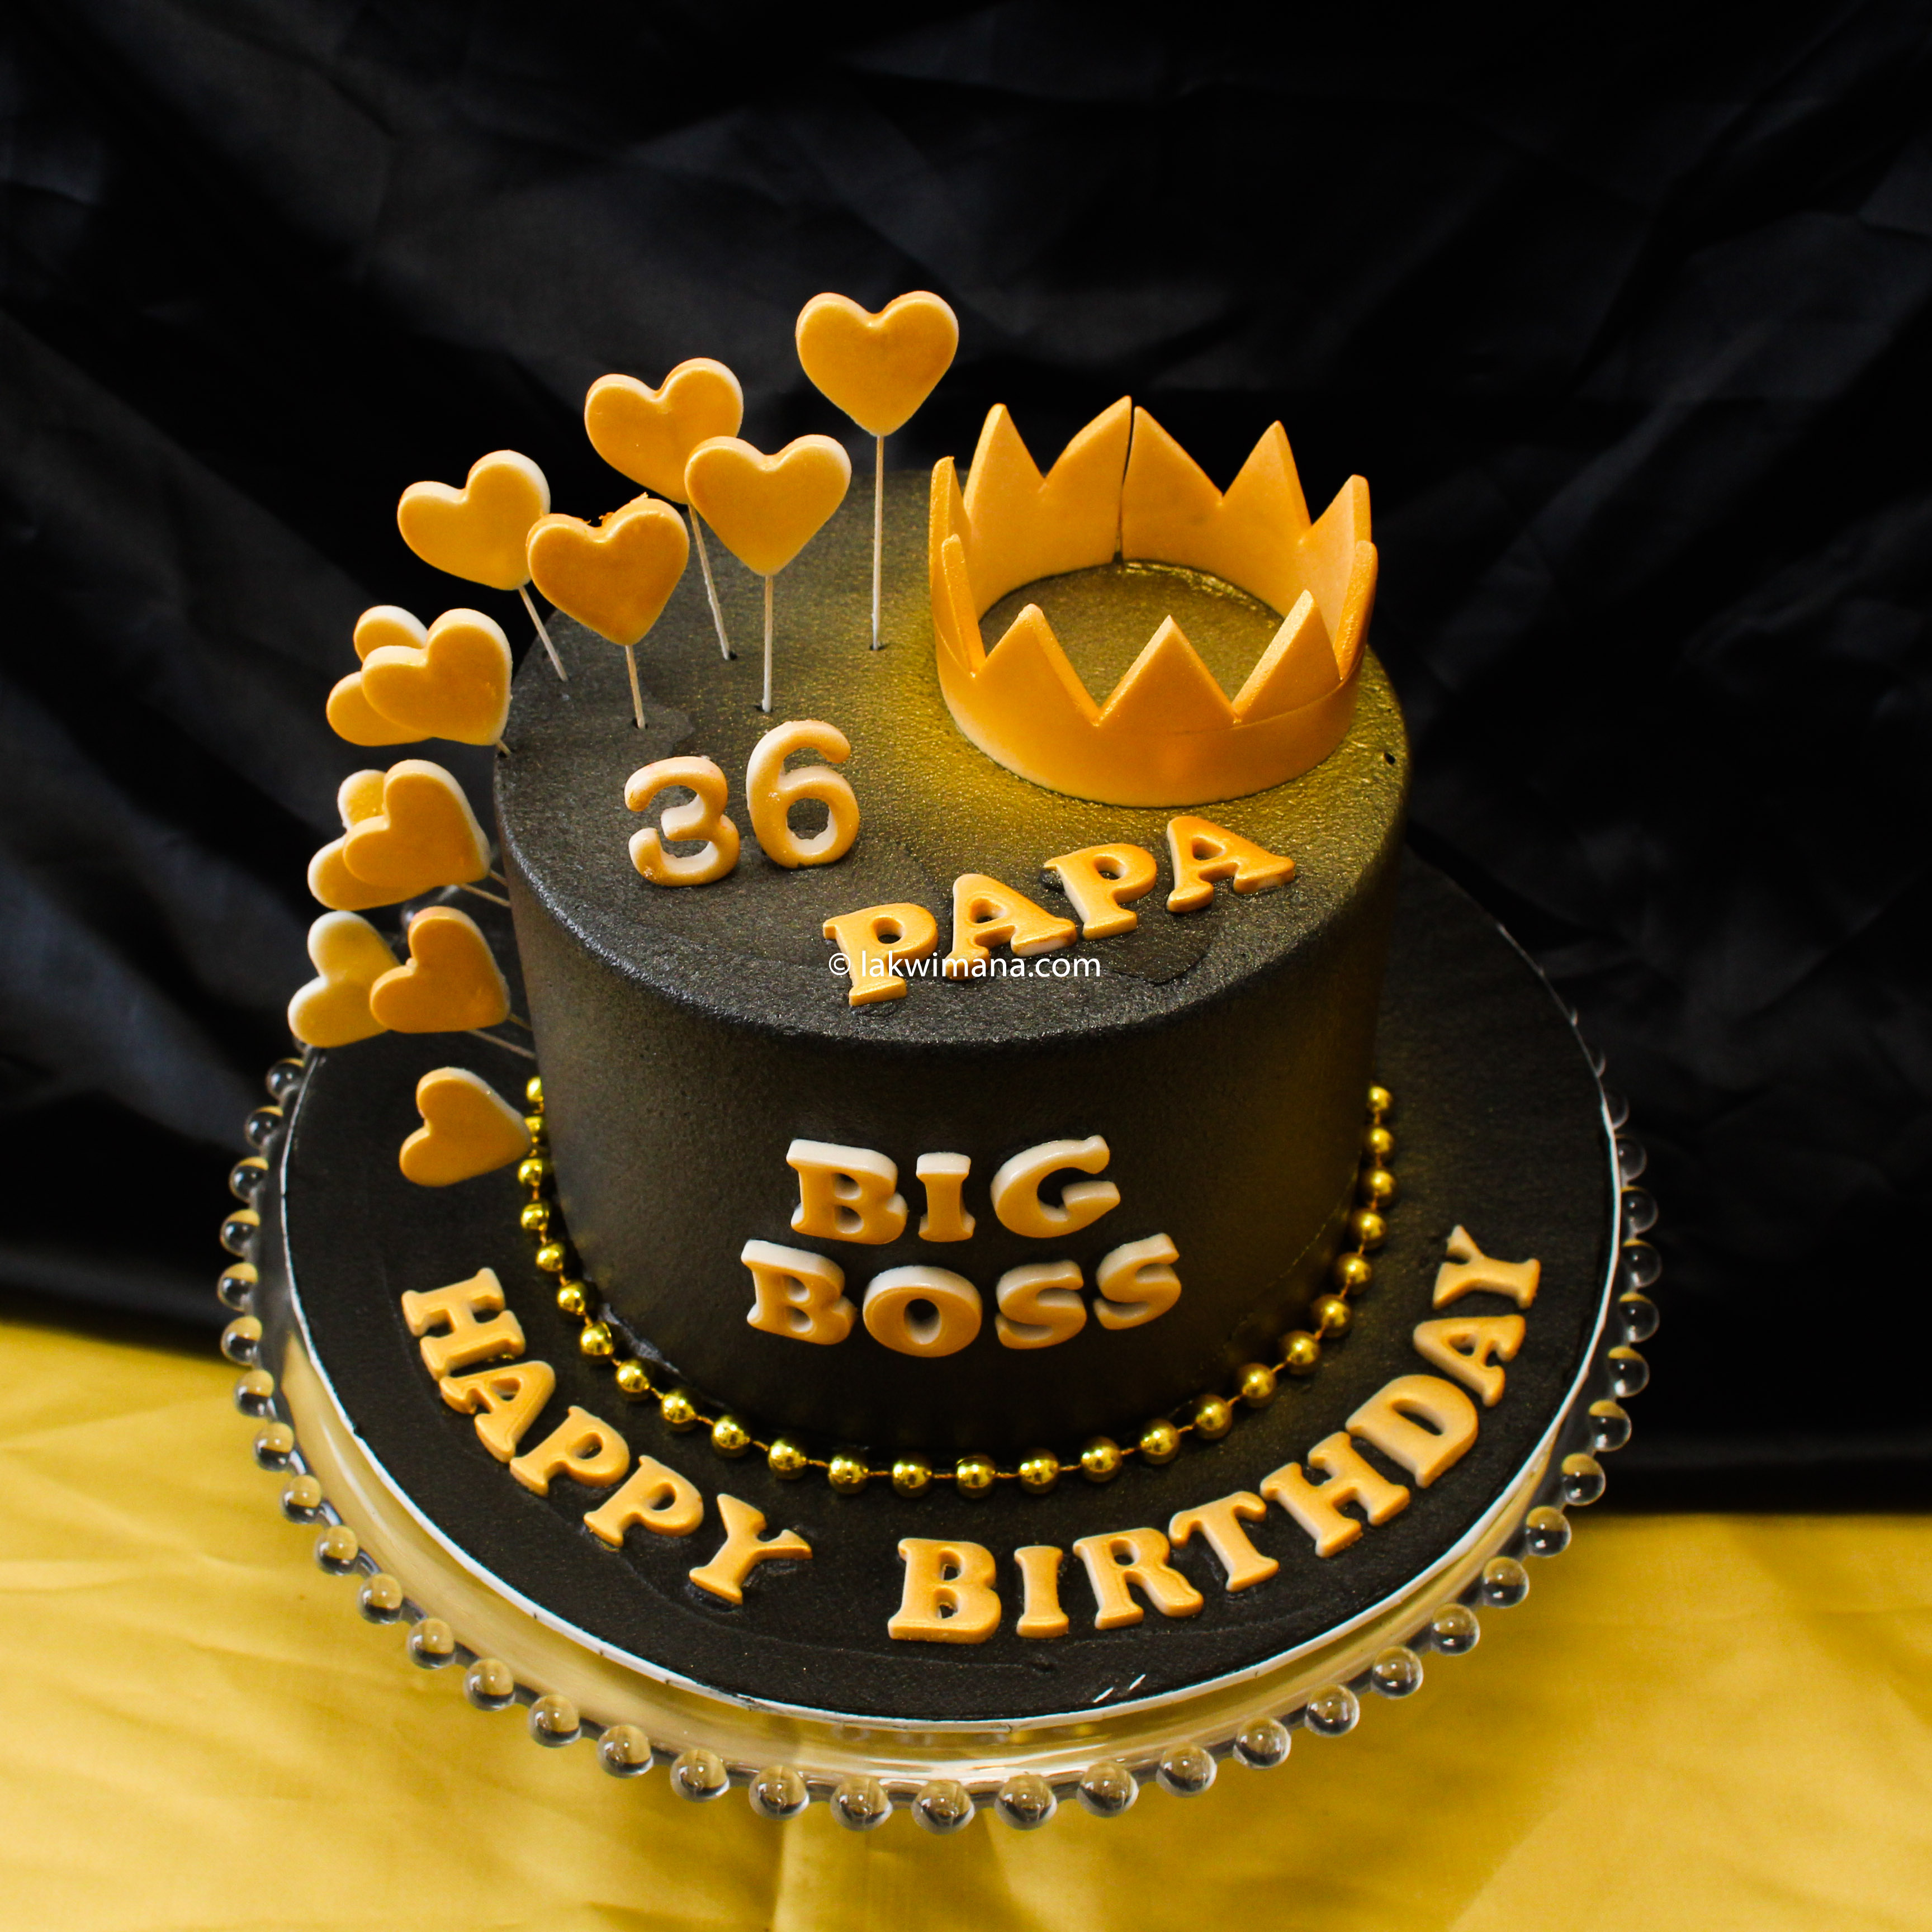 Luxury 40th Birthday Cakes for Him & Her | Free Delivery & Sparkly Gift